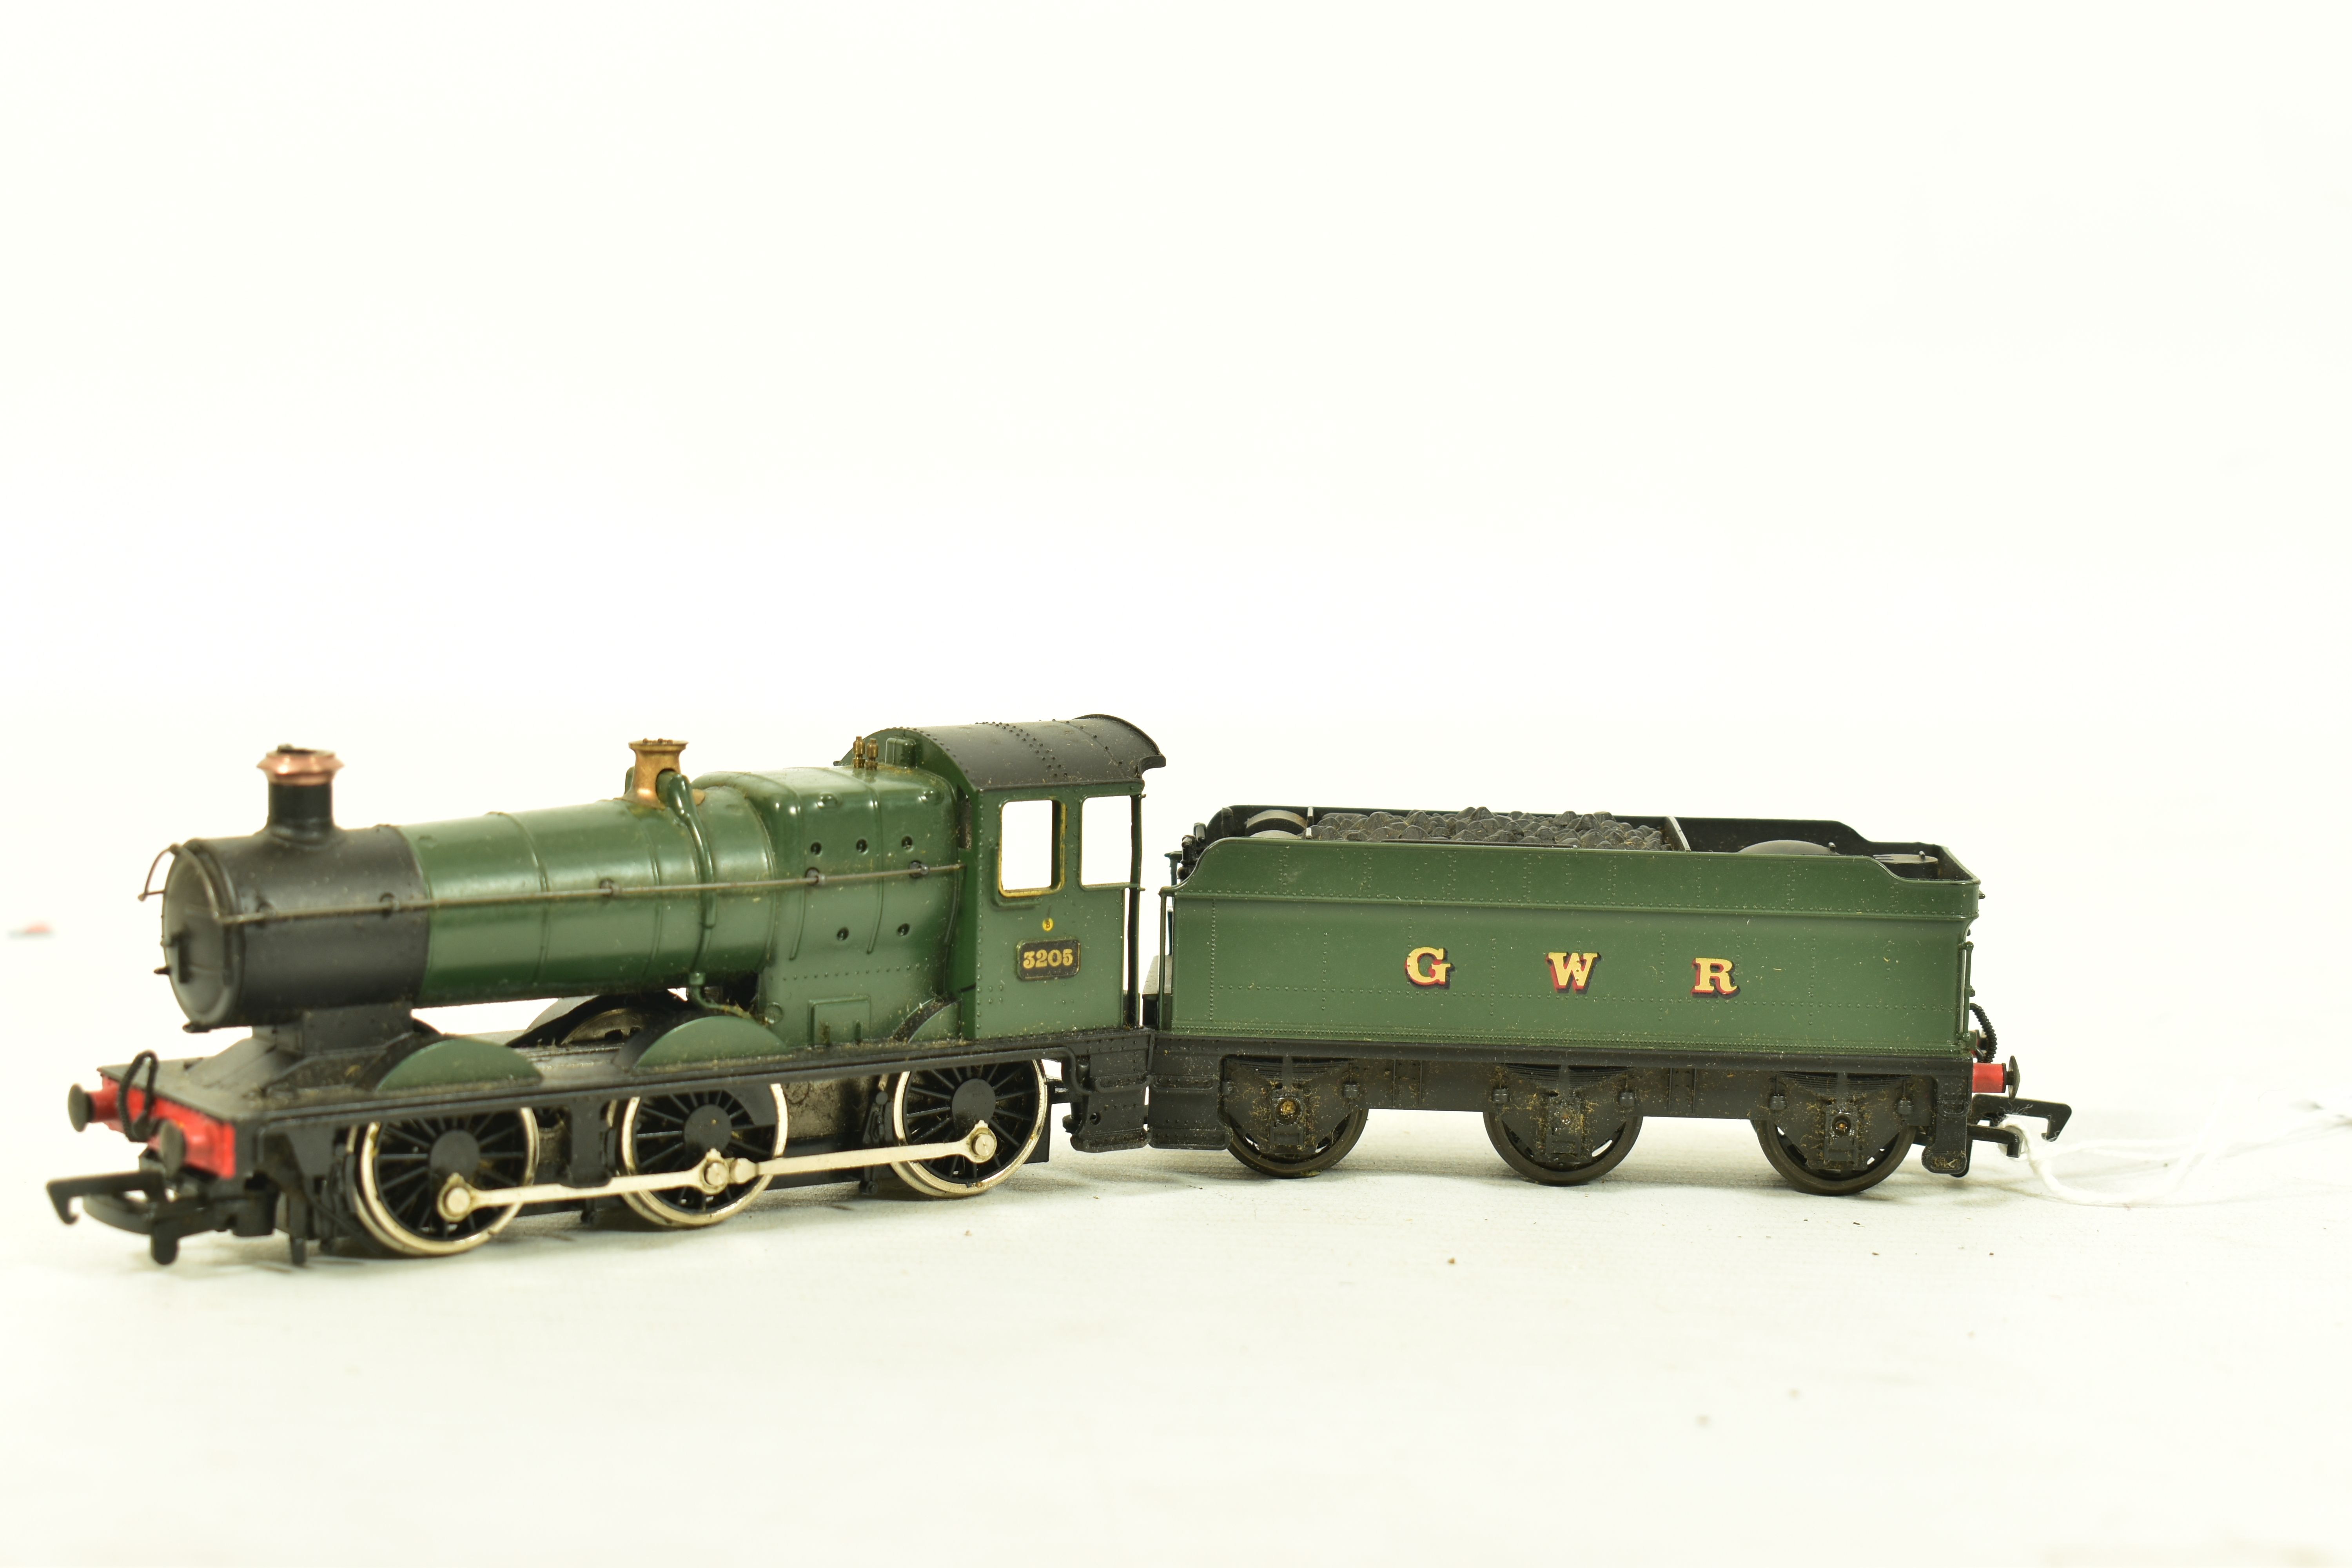 FOUR BOXED MAINLINE OO GAUGE COLLETT GOODS LOCOMOTIVES, 2 x No.3205, G.W.R. green livery (37 058), - Image 6 of 9